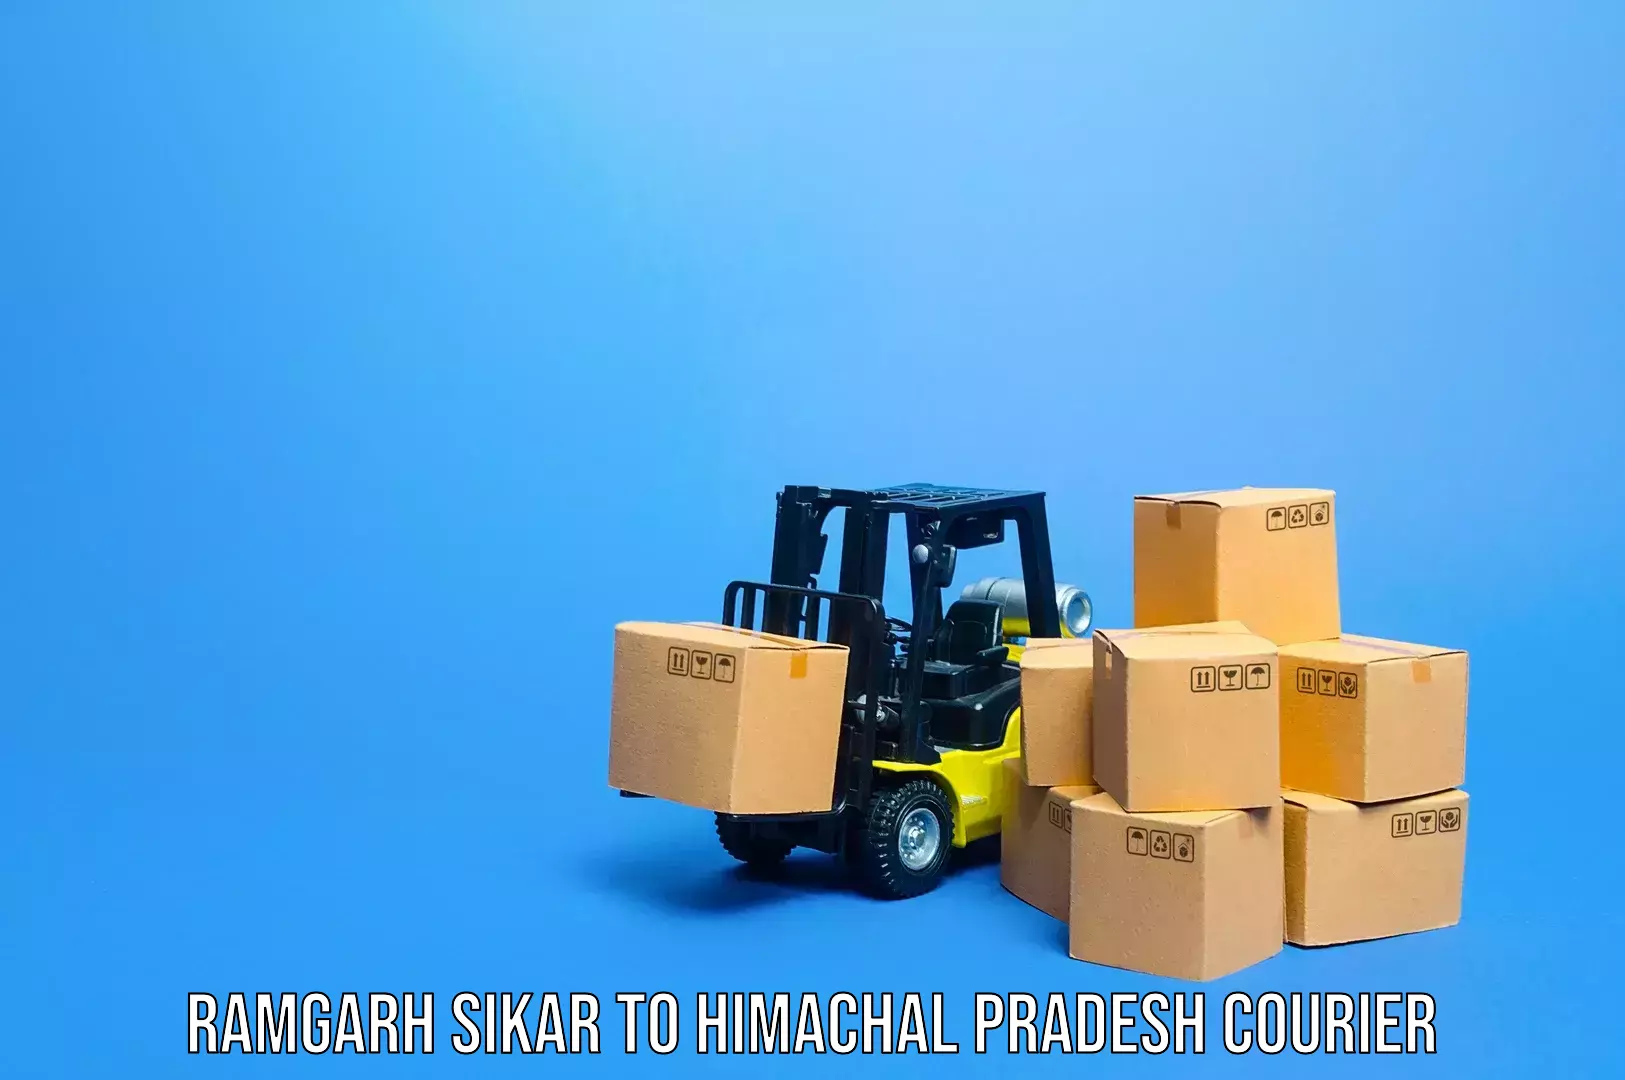 Emergency luggage shipping Ramgarh Sikar to YS Parmar University of Horticulture and Forestry Solan